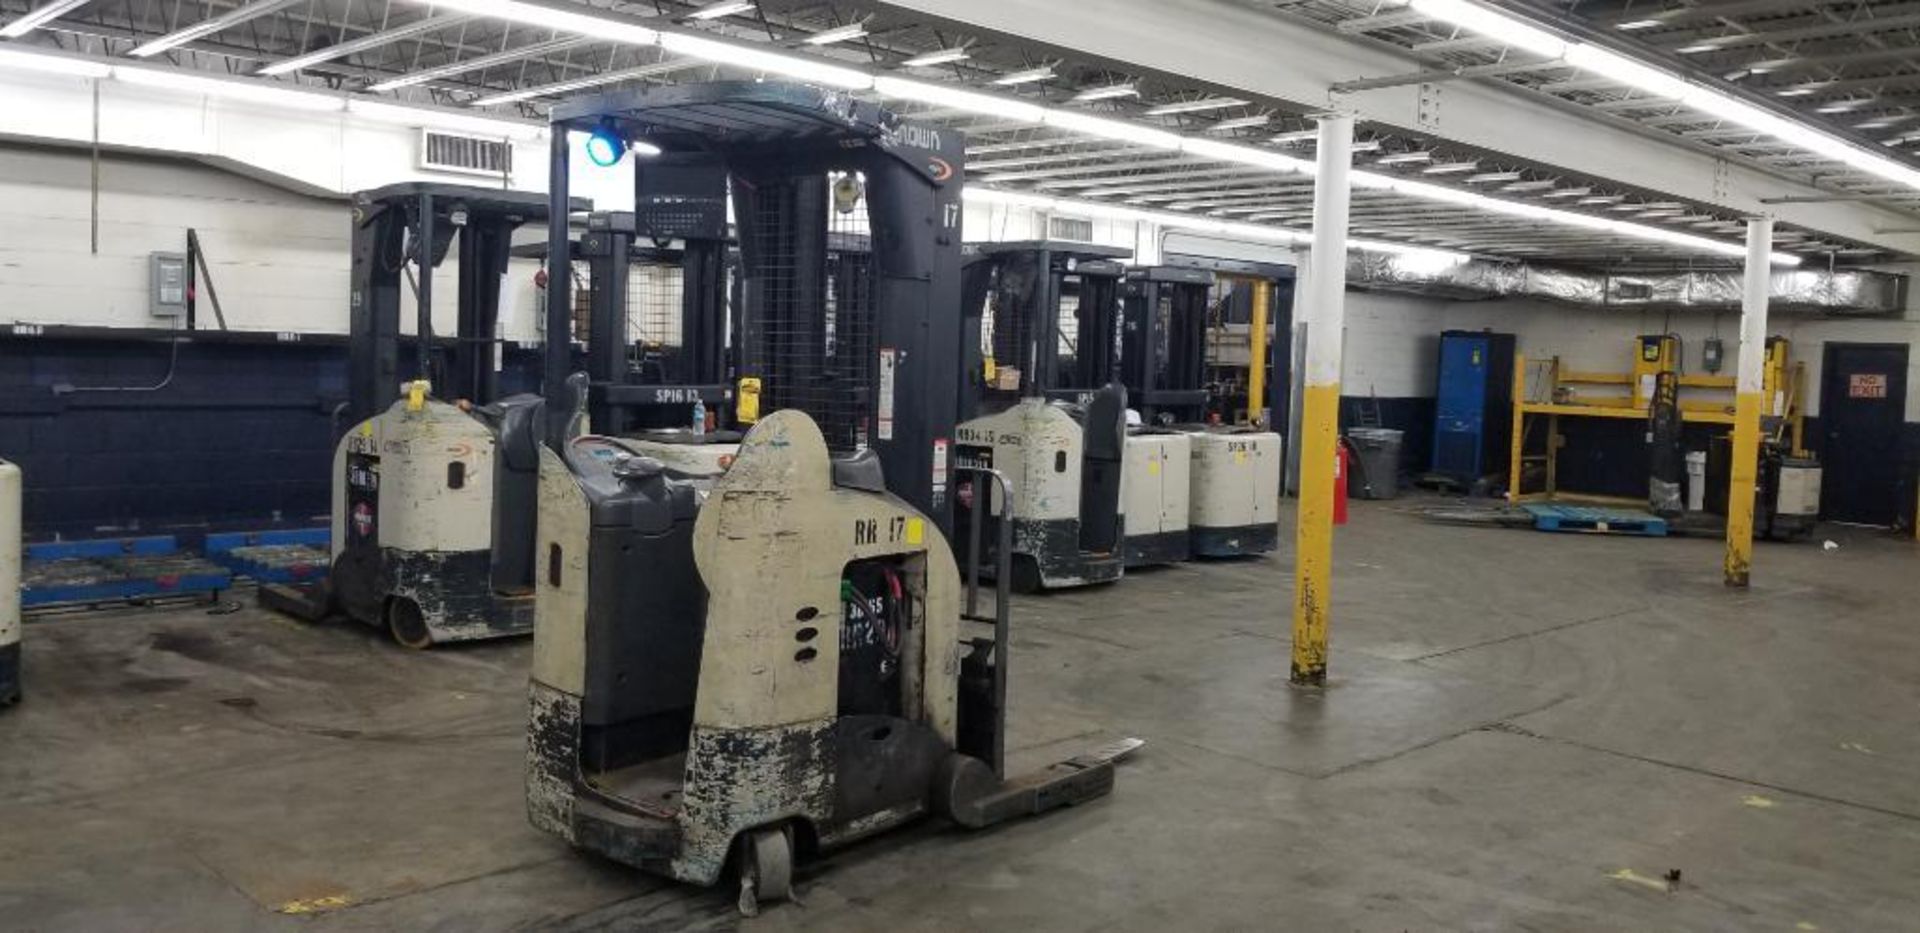 Crown RR 5200 Series Electric Reach Truck, Model RR5220-45, S/N 1A274886, 4,500 LB. Lift Capacity, 2 - Image 4 of 8